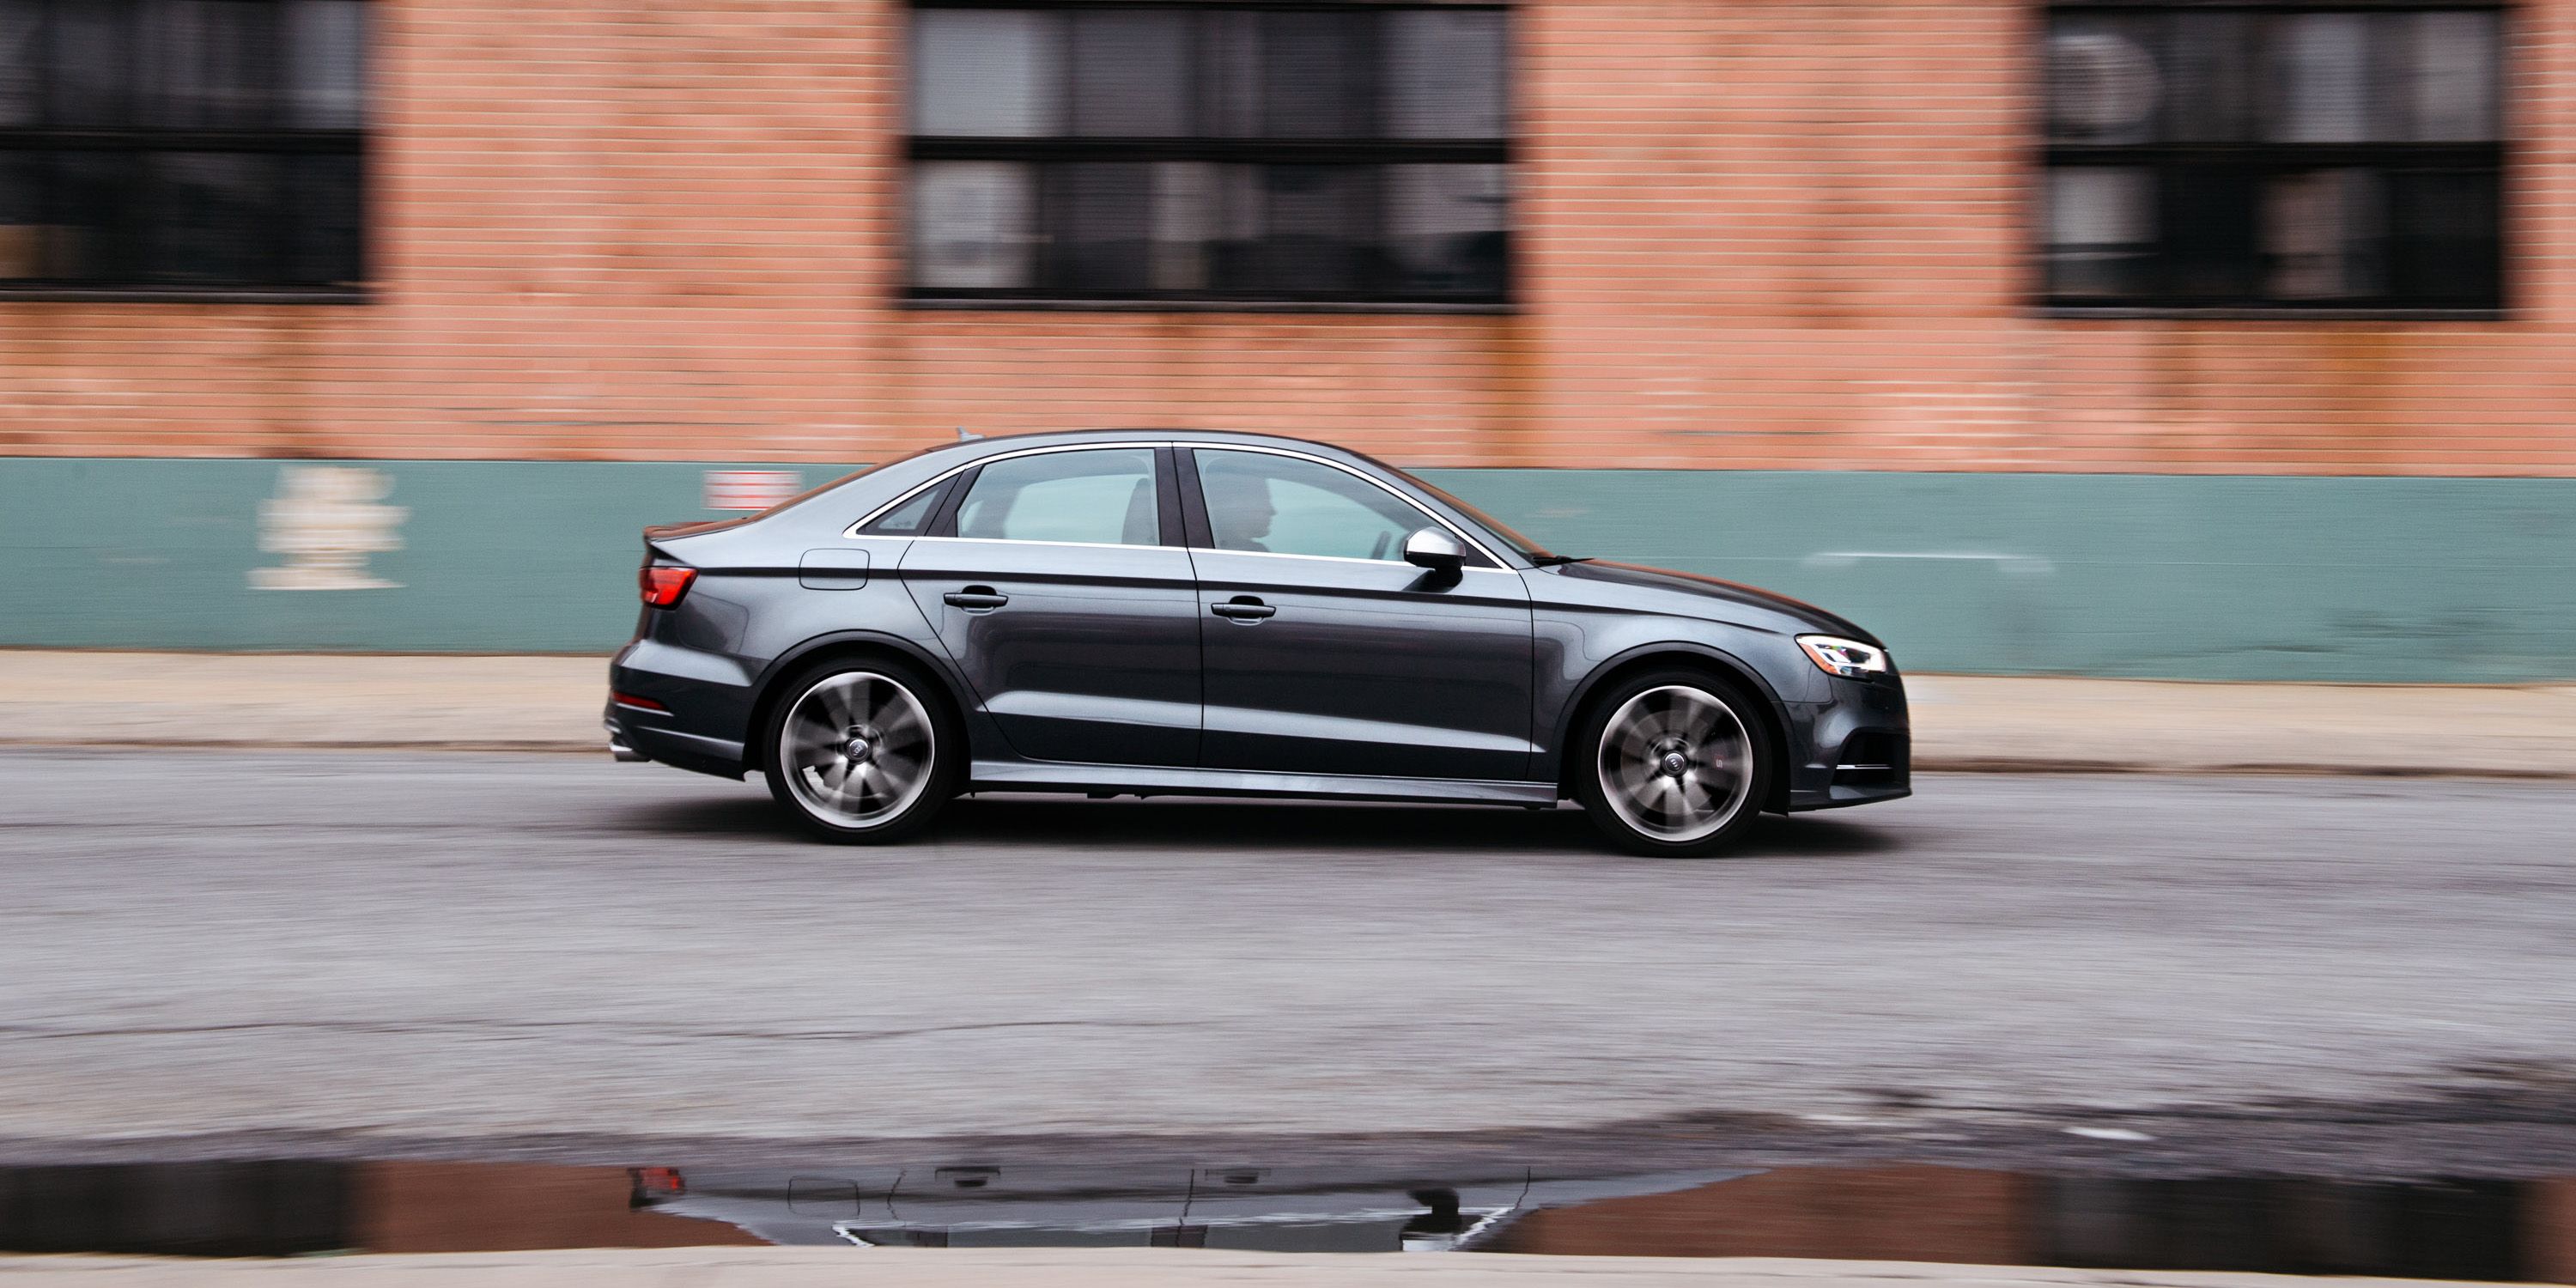 The Audi S3 Is a Little Monster